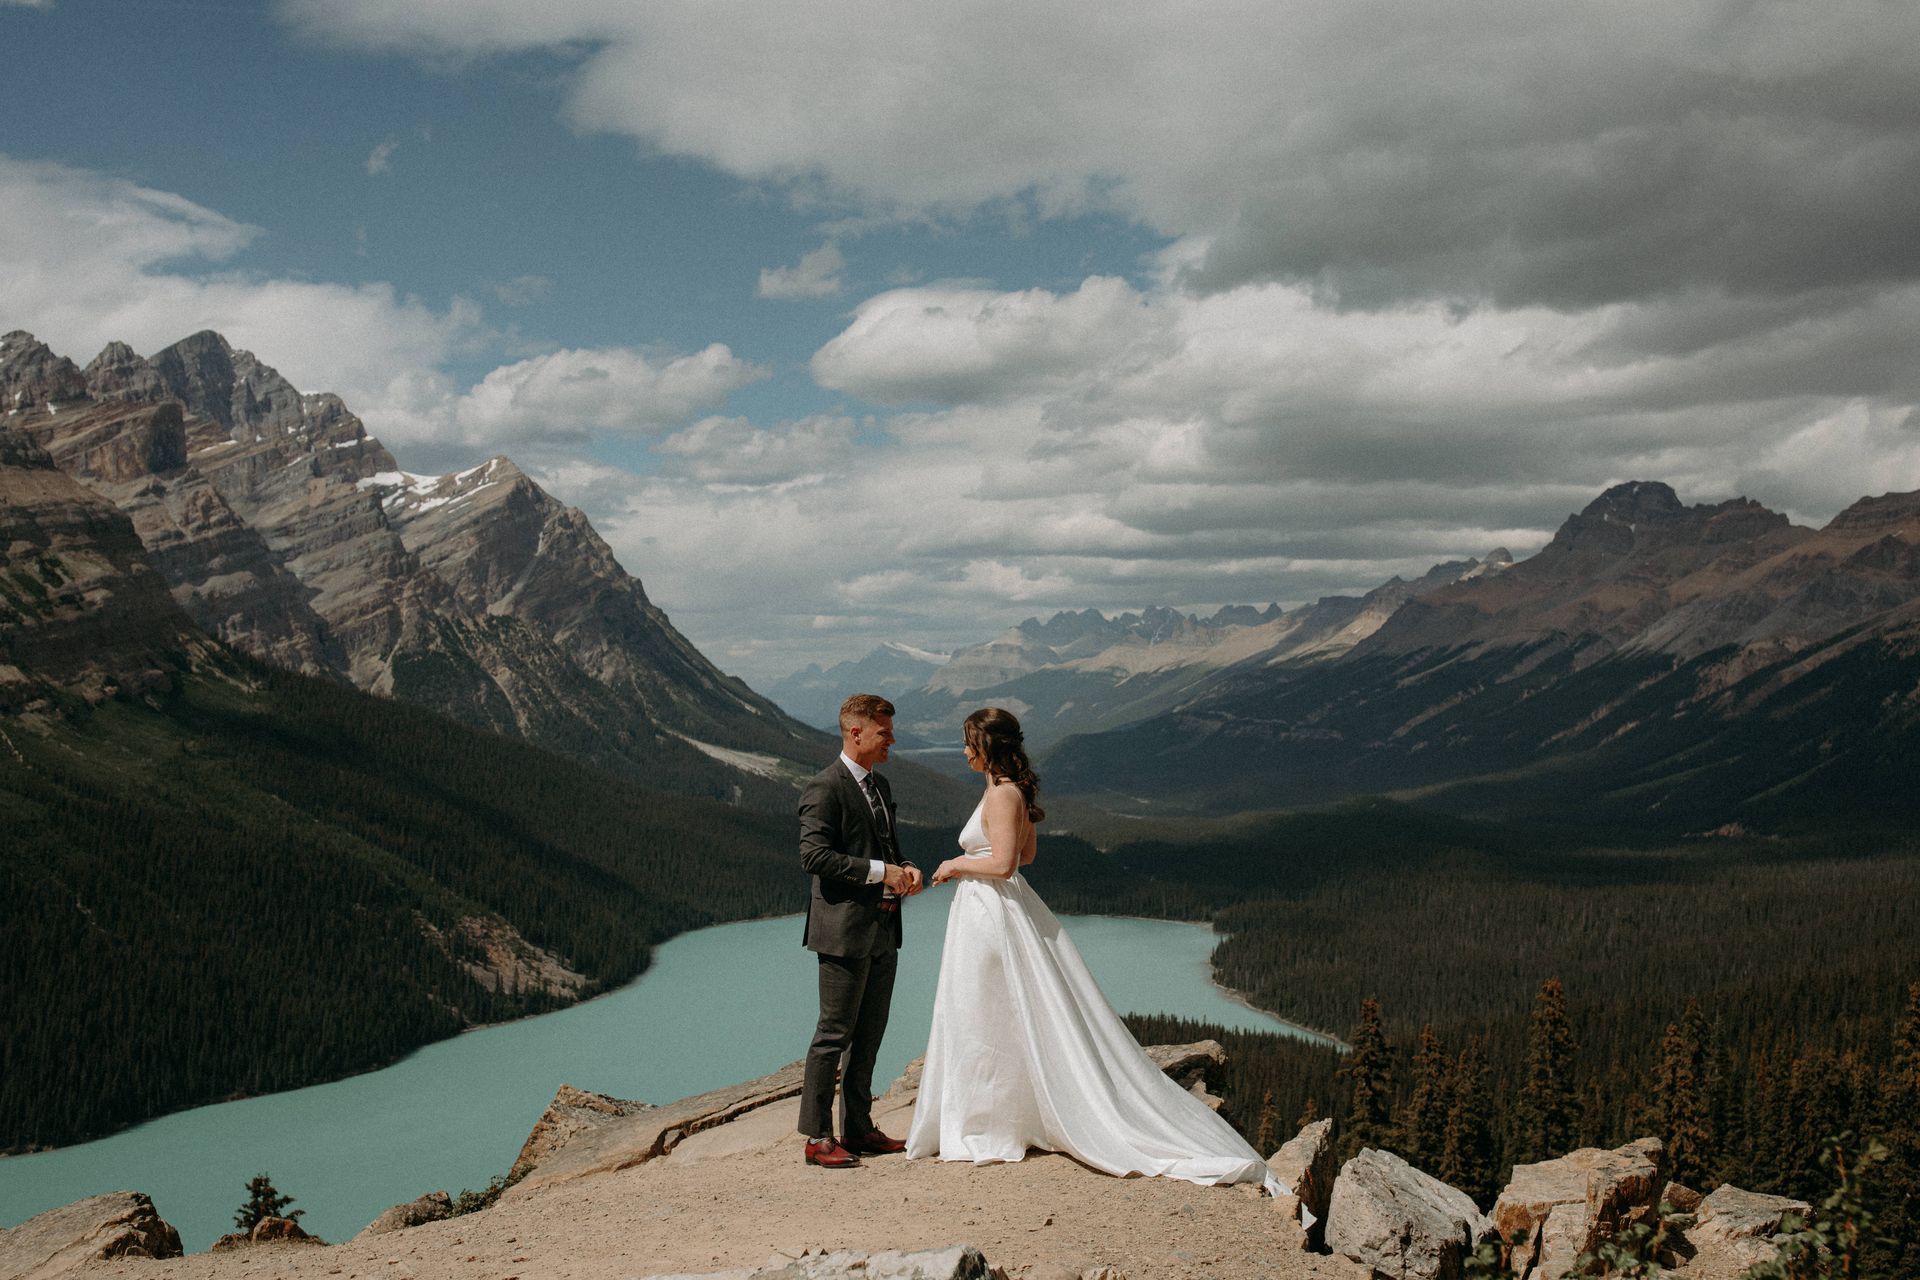 How to Choose the Best Venue for Your Alberta Mountain Wedding